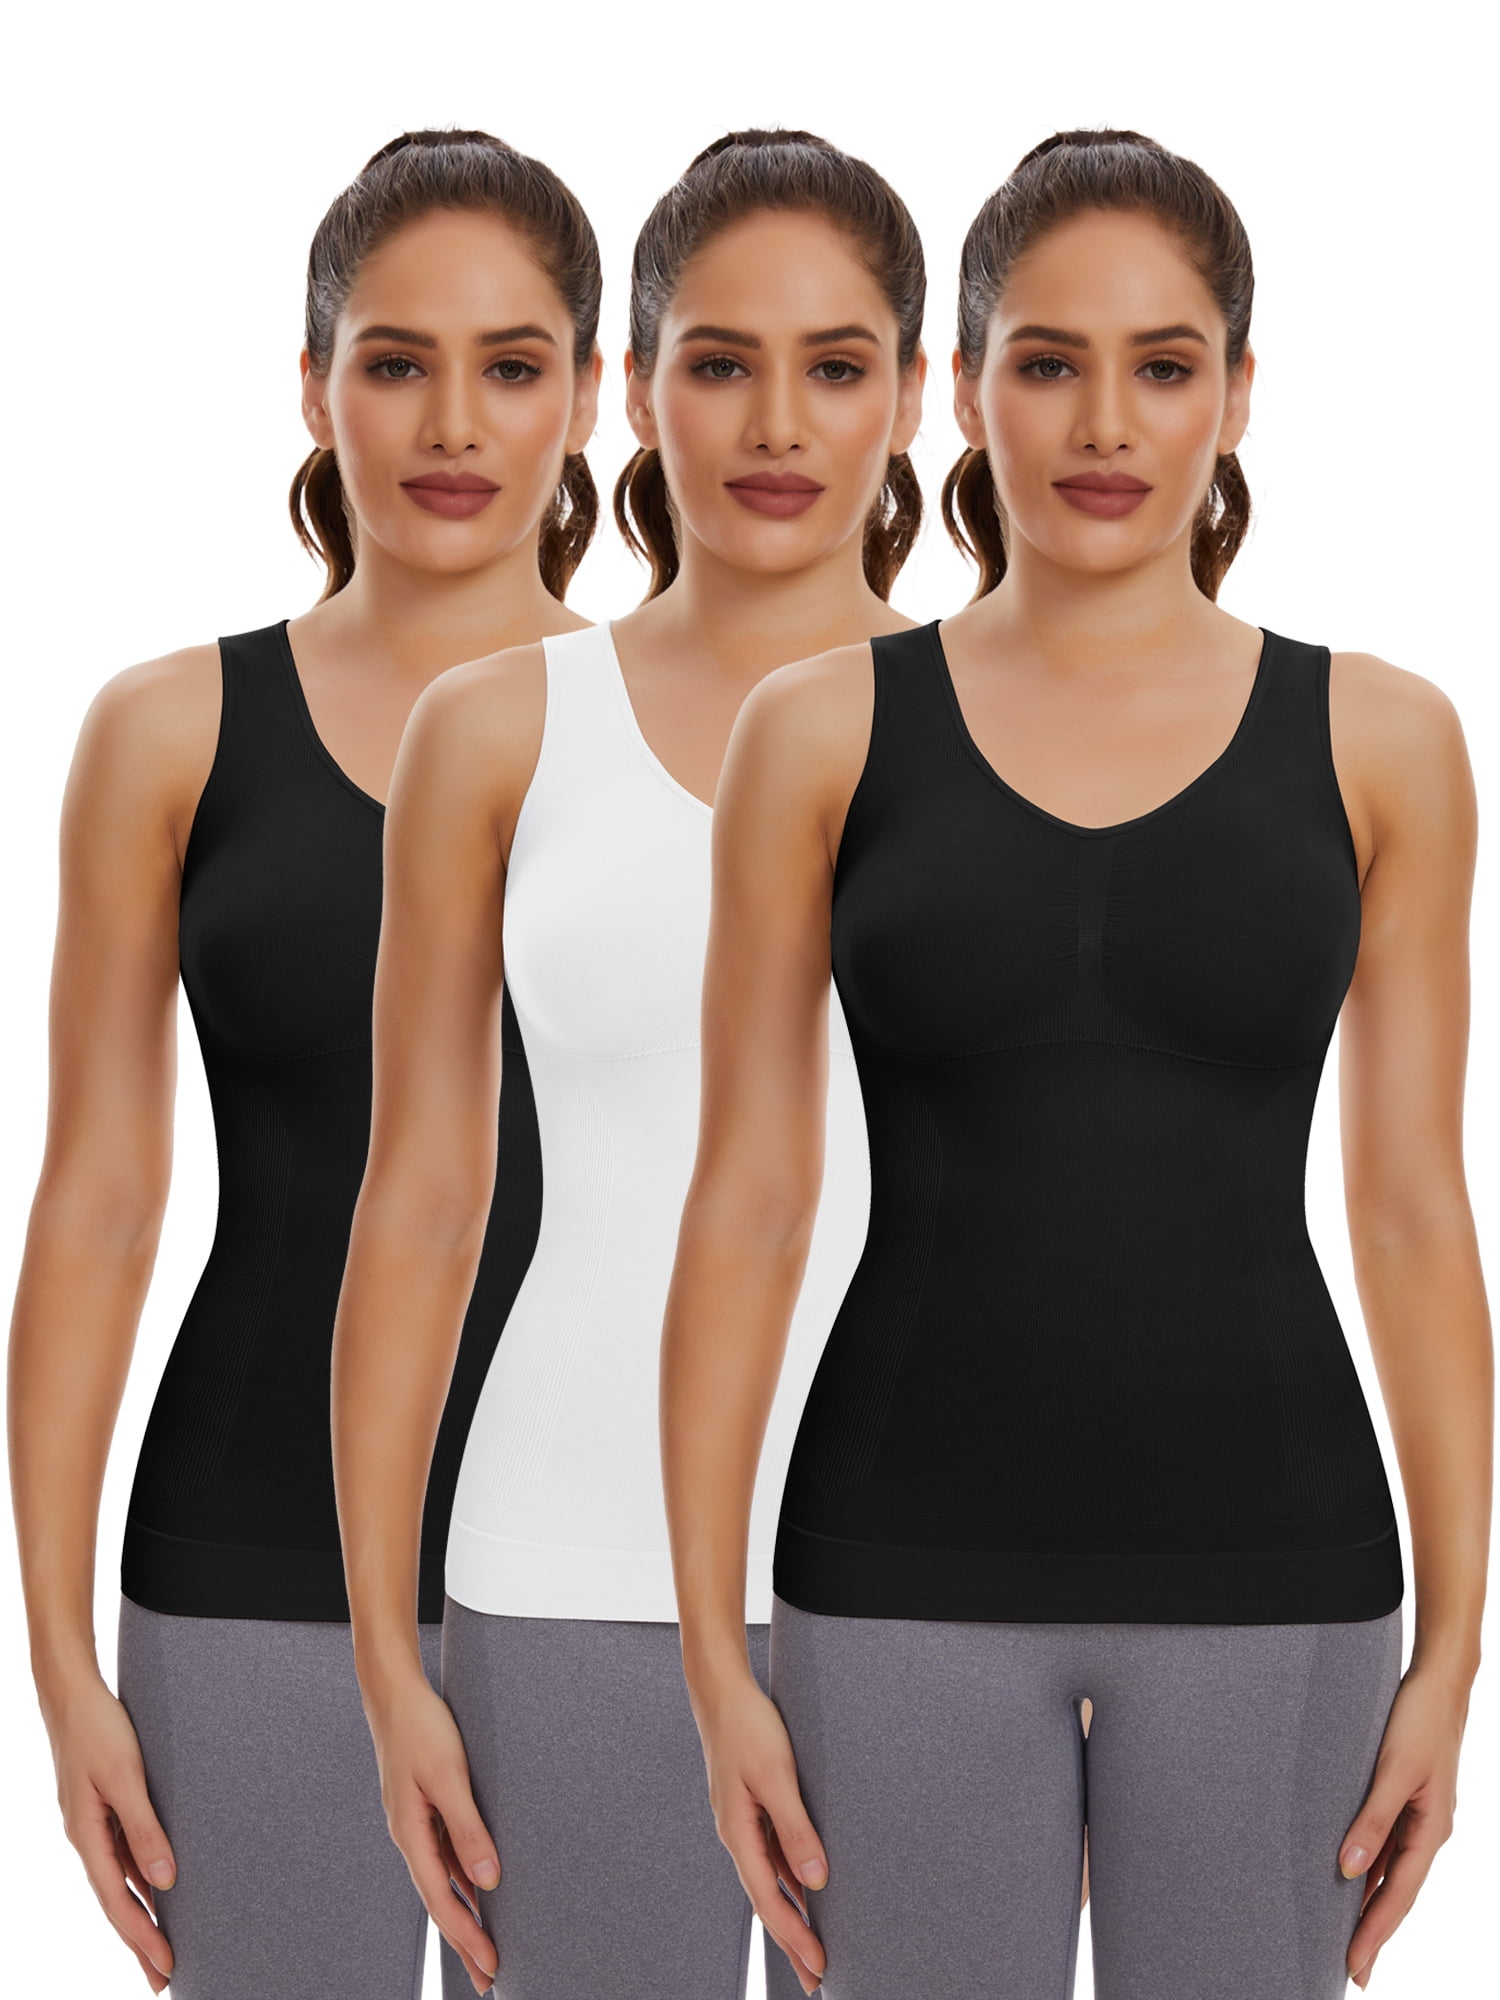 COMFREE Women's Cami Shaper Plus Size with Built in Bra Camisole